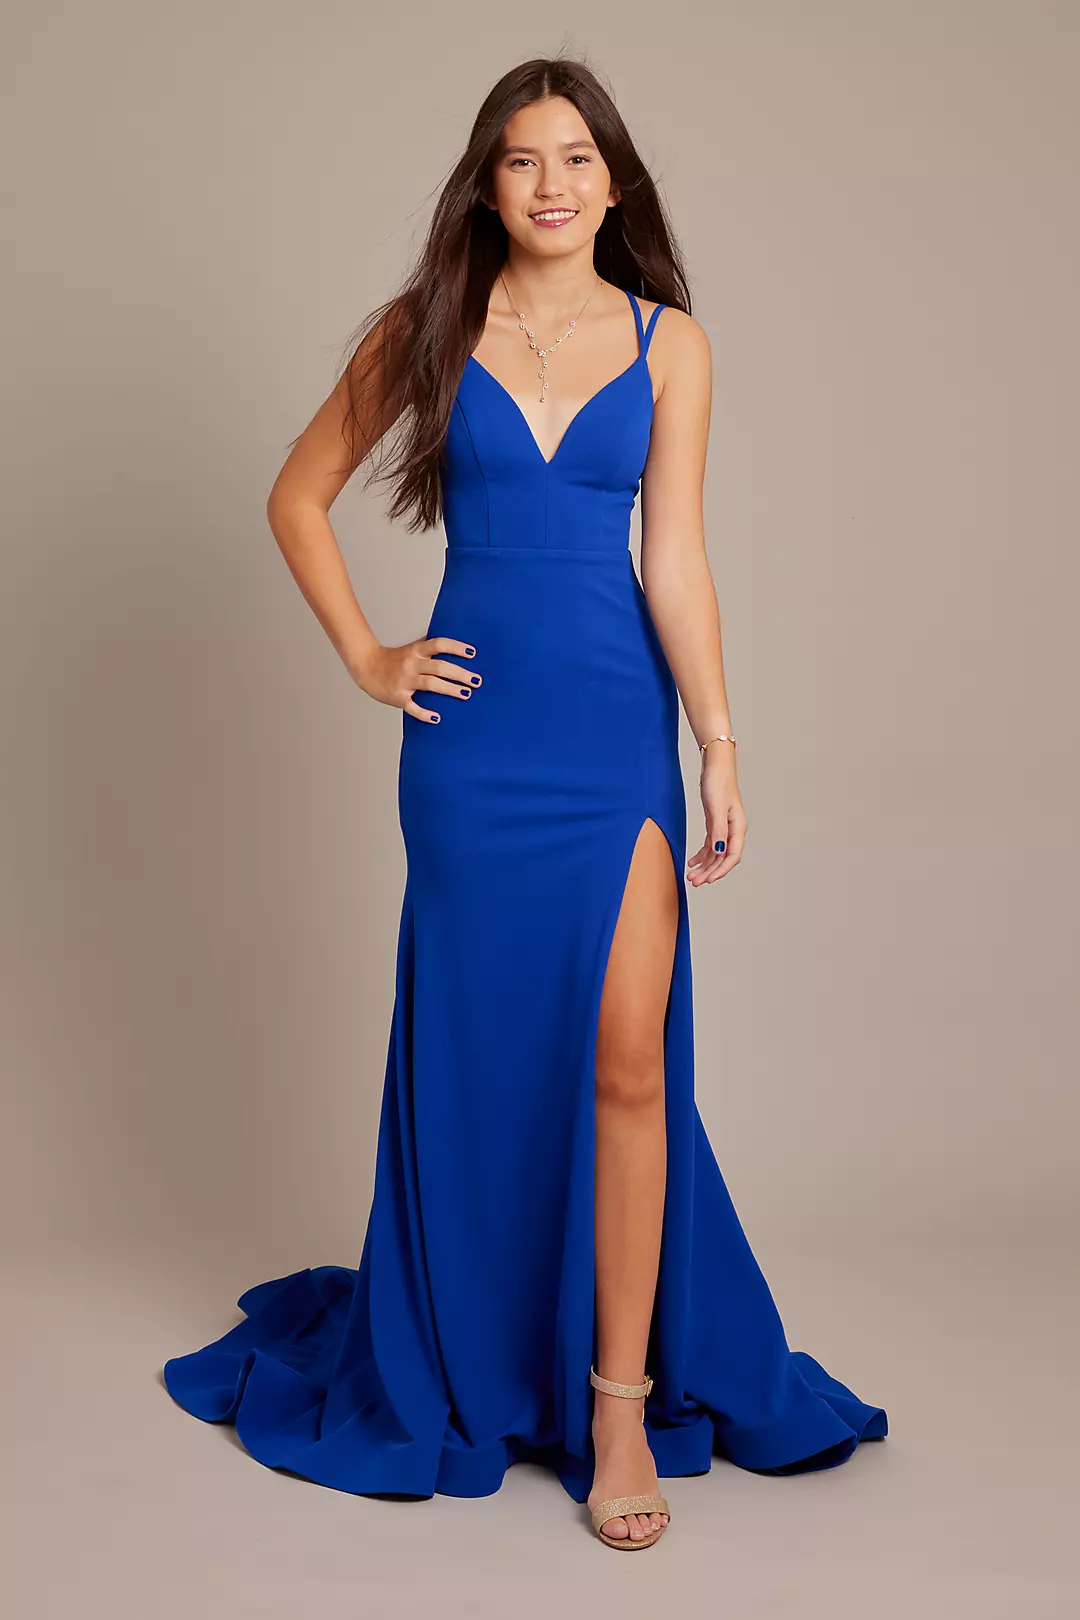 Crepe V-Neck Mermaid Gown with Lace-Up Back Image 1